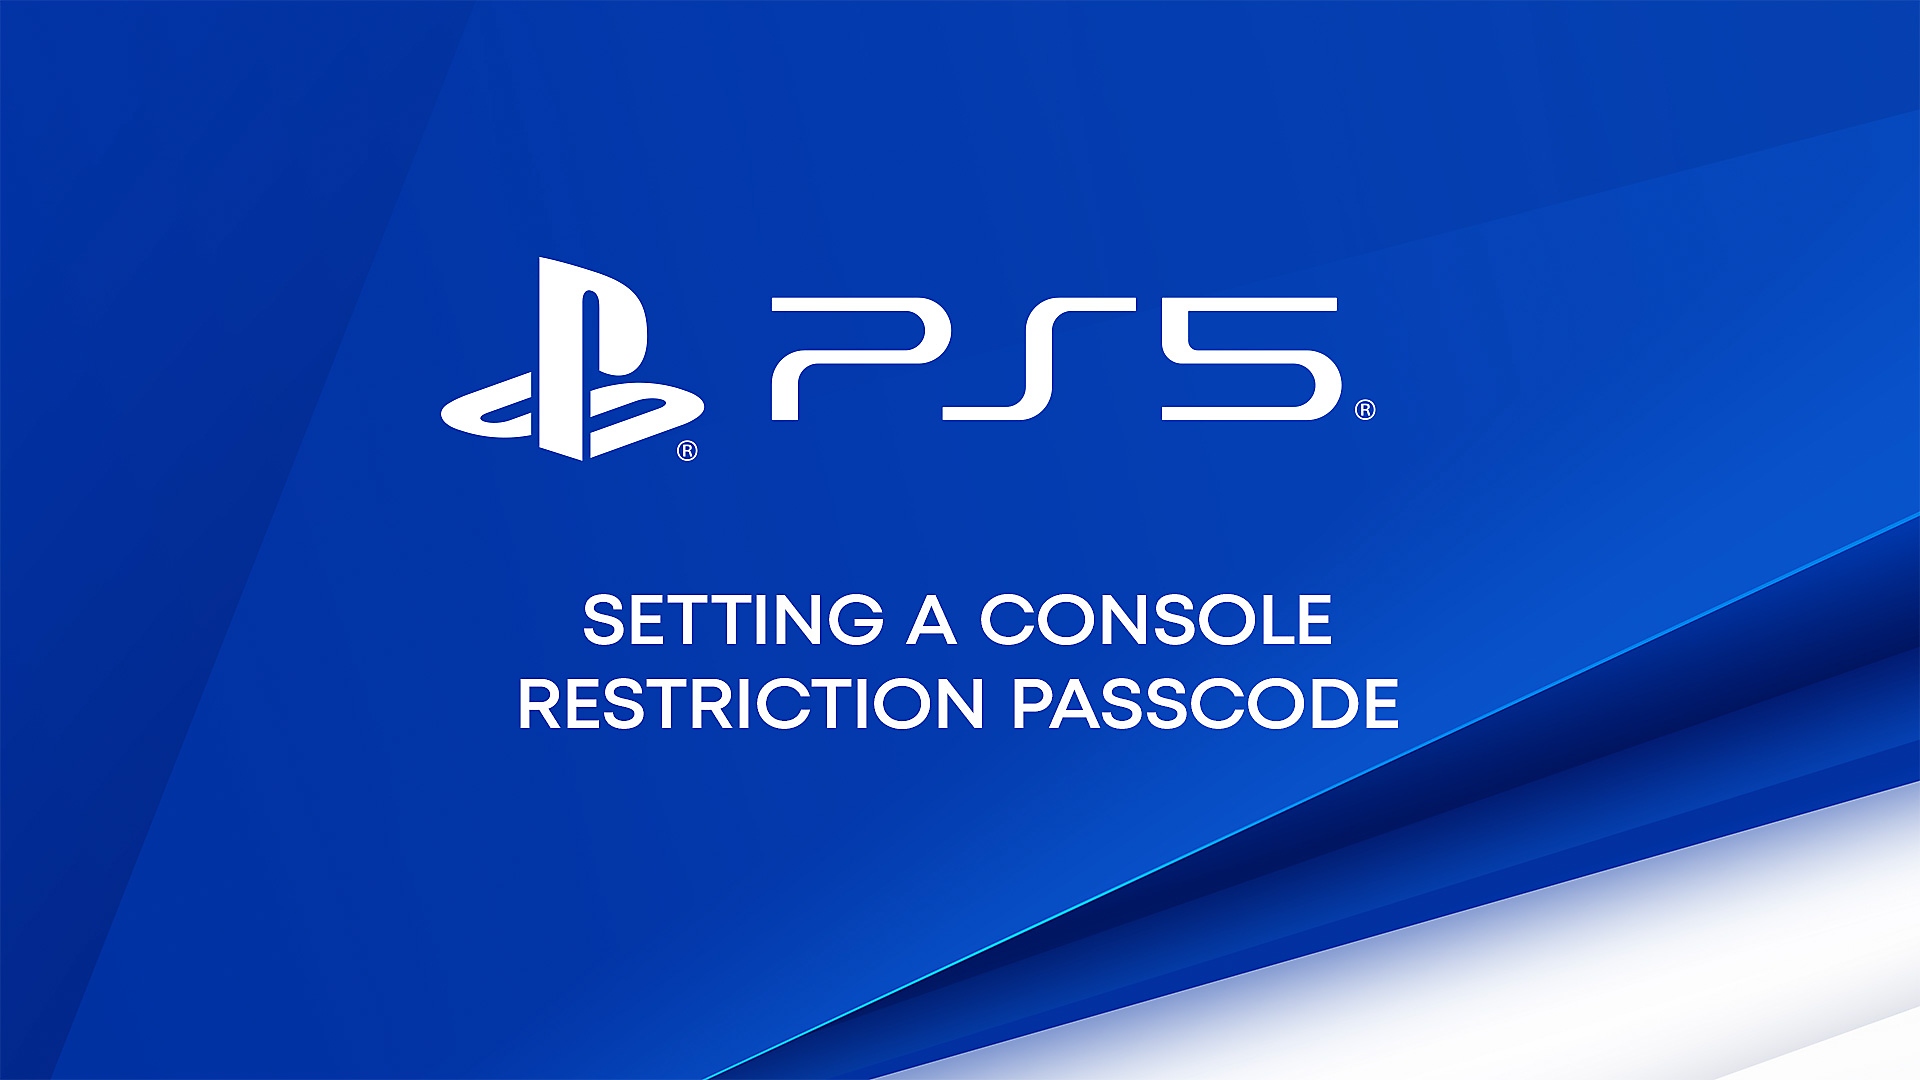 Video showing how to set a console restriction passcode on PS5